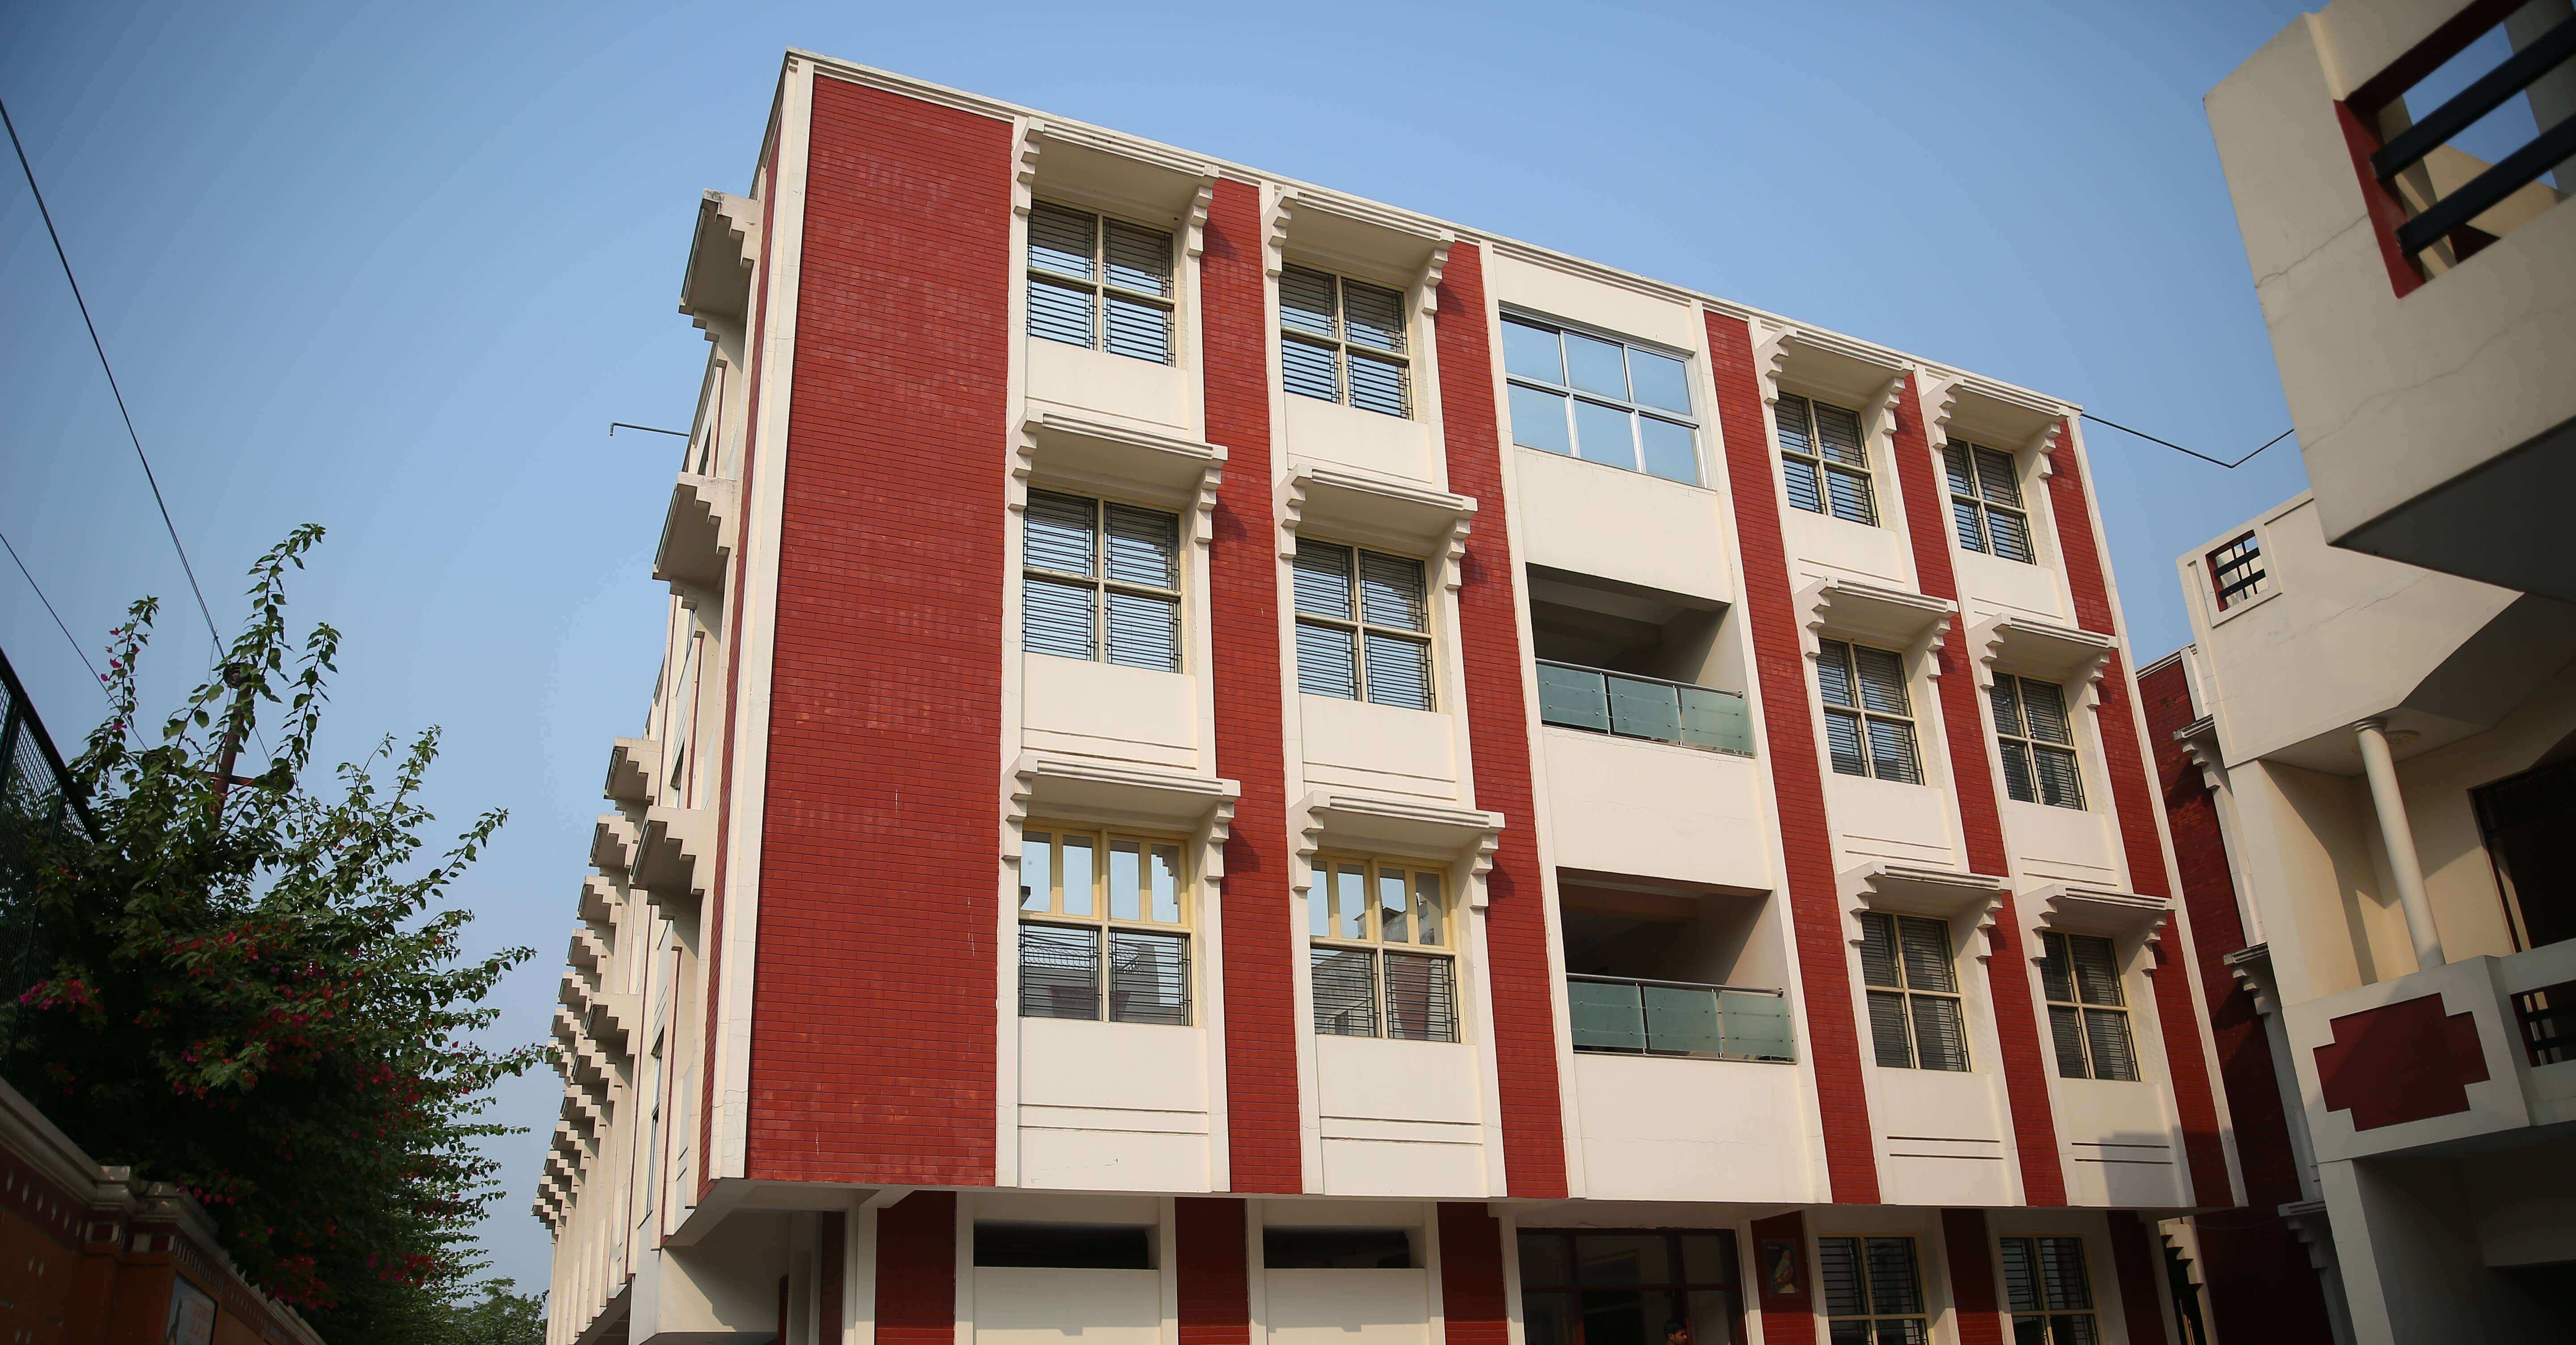 Mother Teresa Mission Higher Secondary School, Kanpur